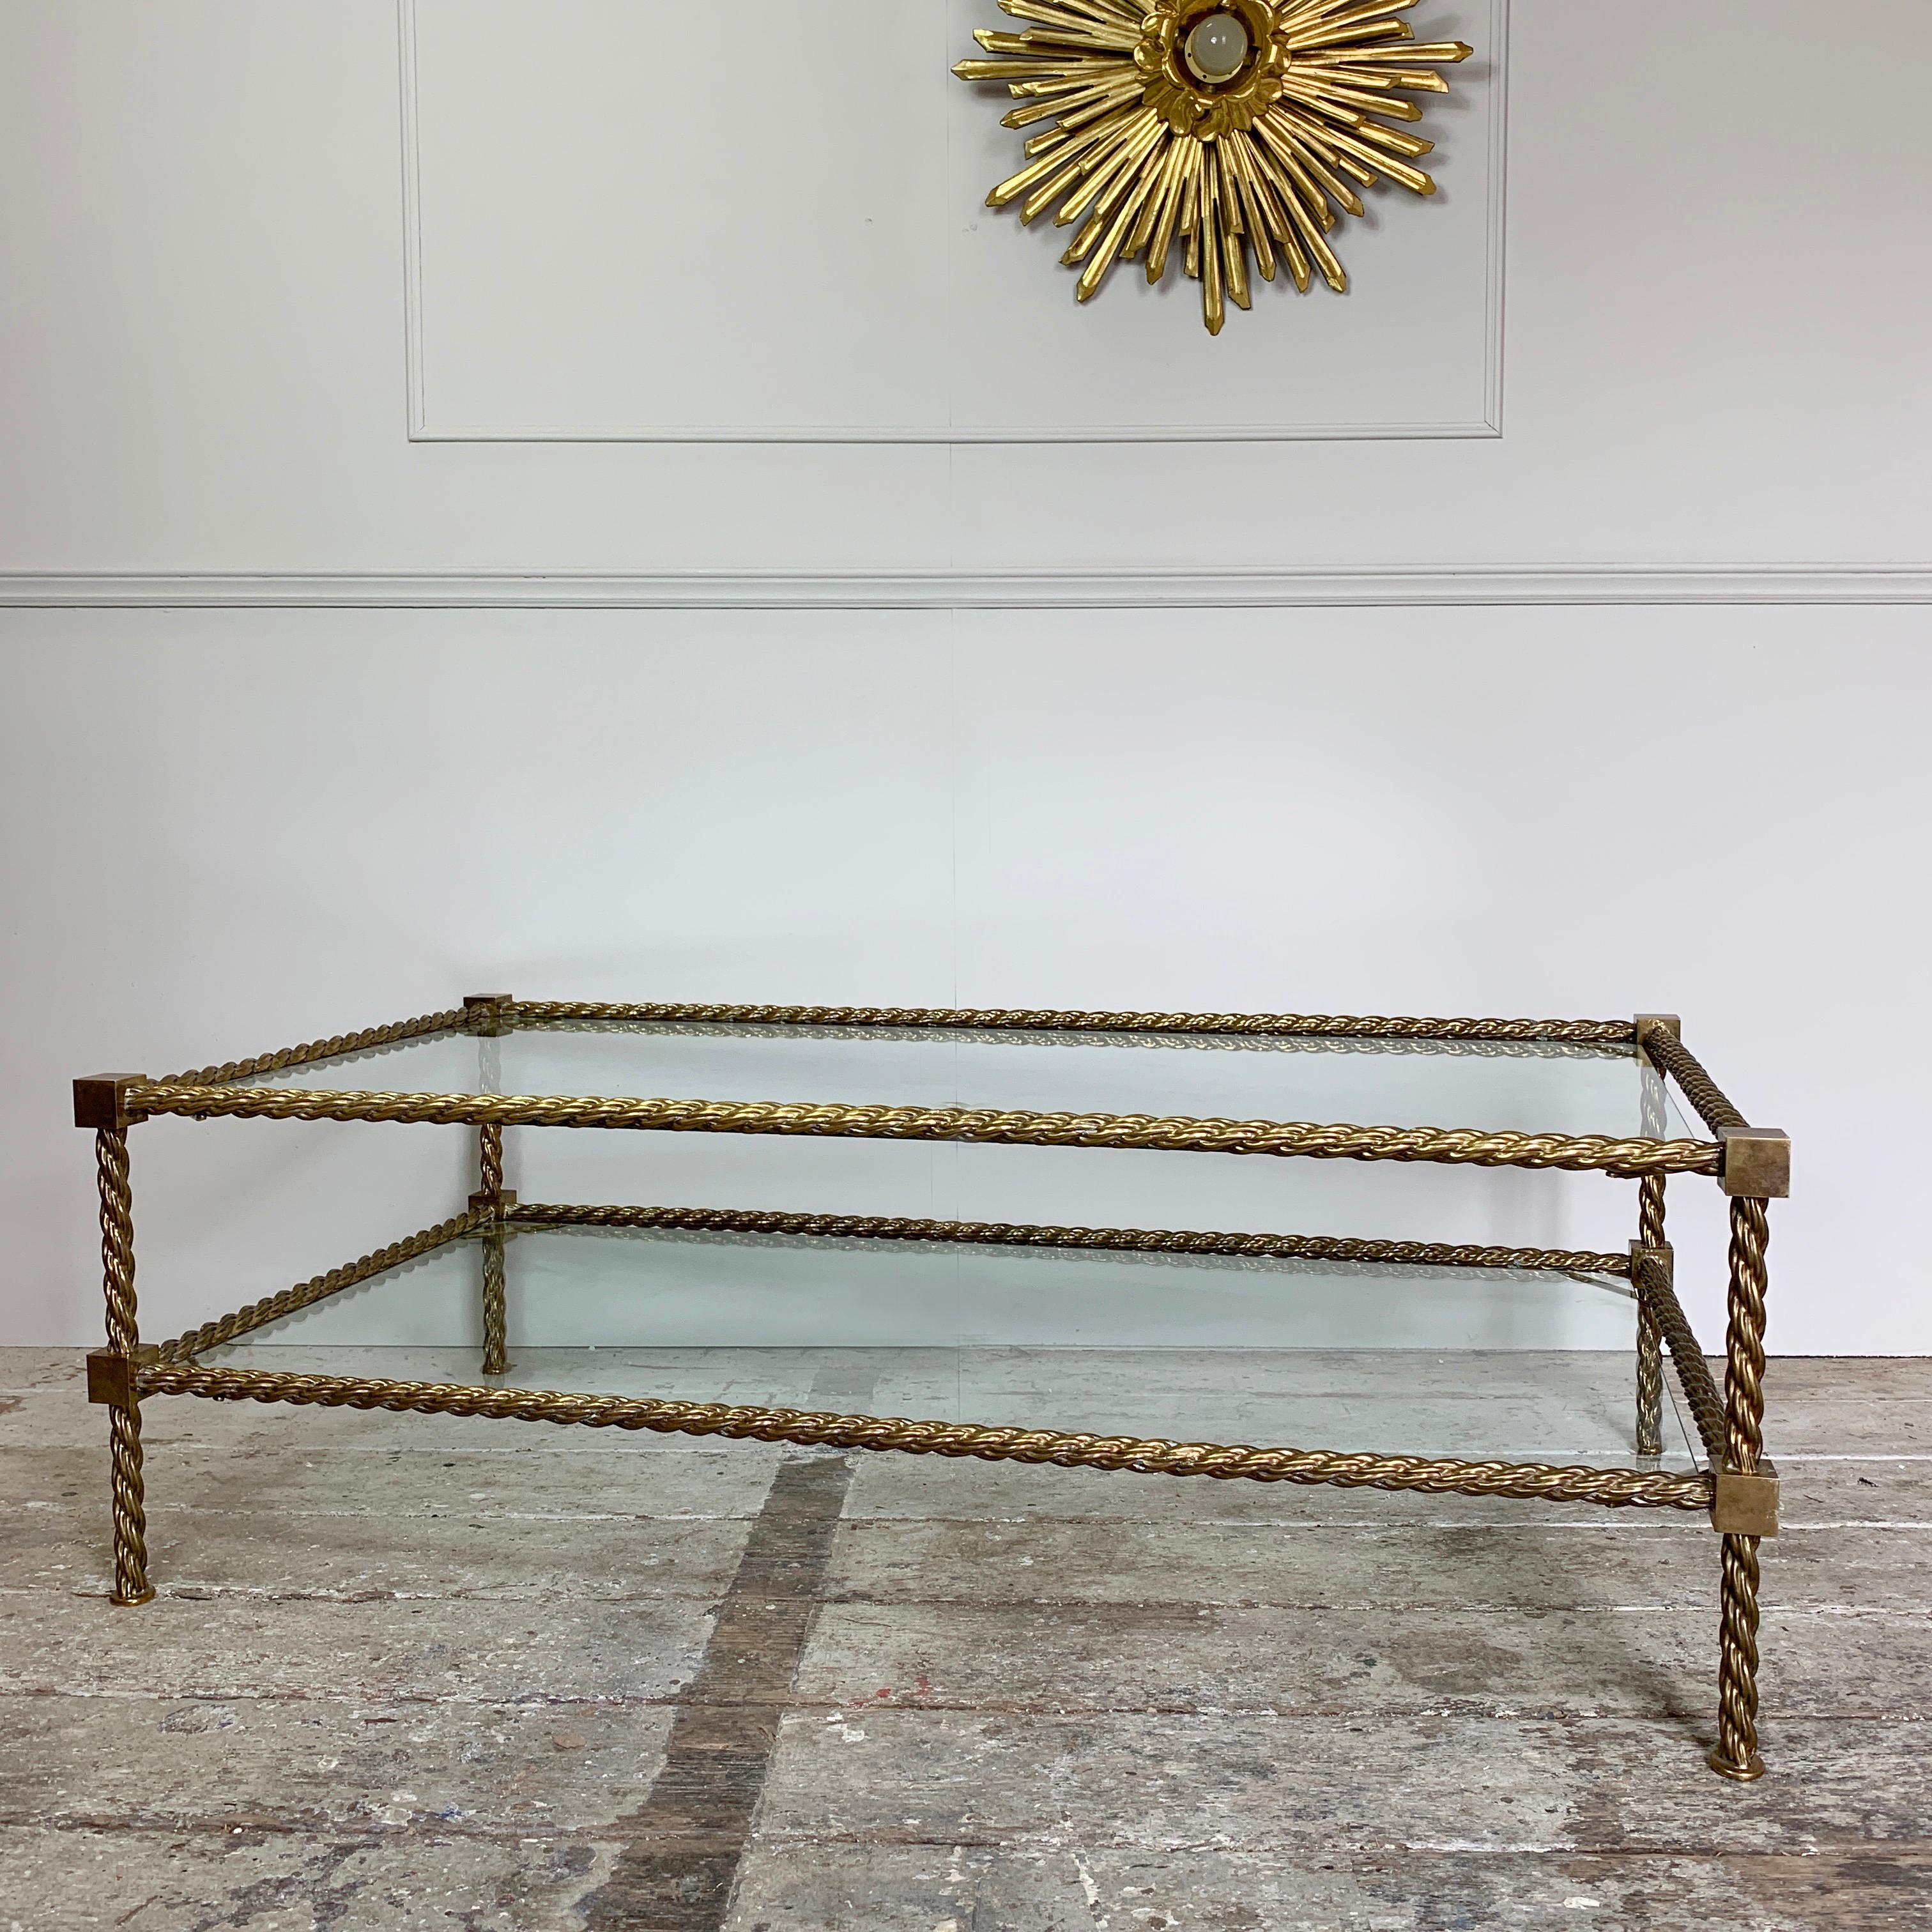 Italian brass rope coffee table
midcentury circa 1960s-1970s
A high quality solid brass twisted rope detail base with 2 glass shelves
The shelves rest on brass rods at each corner
The glass panels are shaped at the corners to fit the table